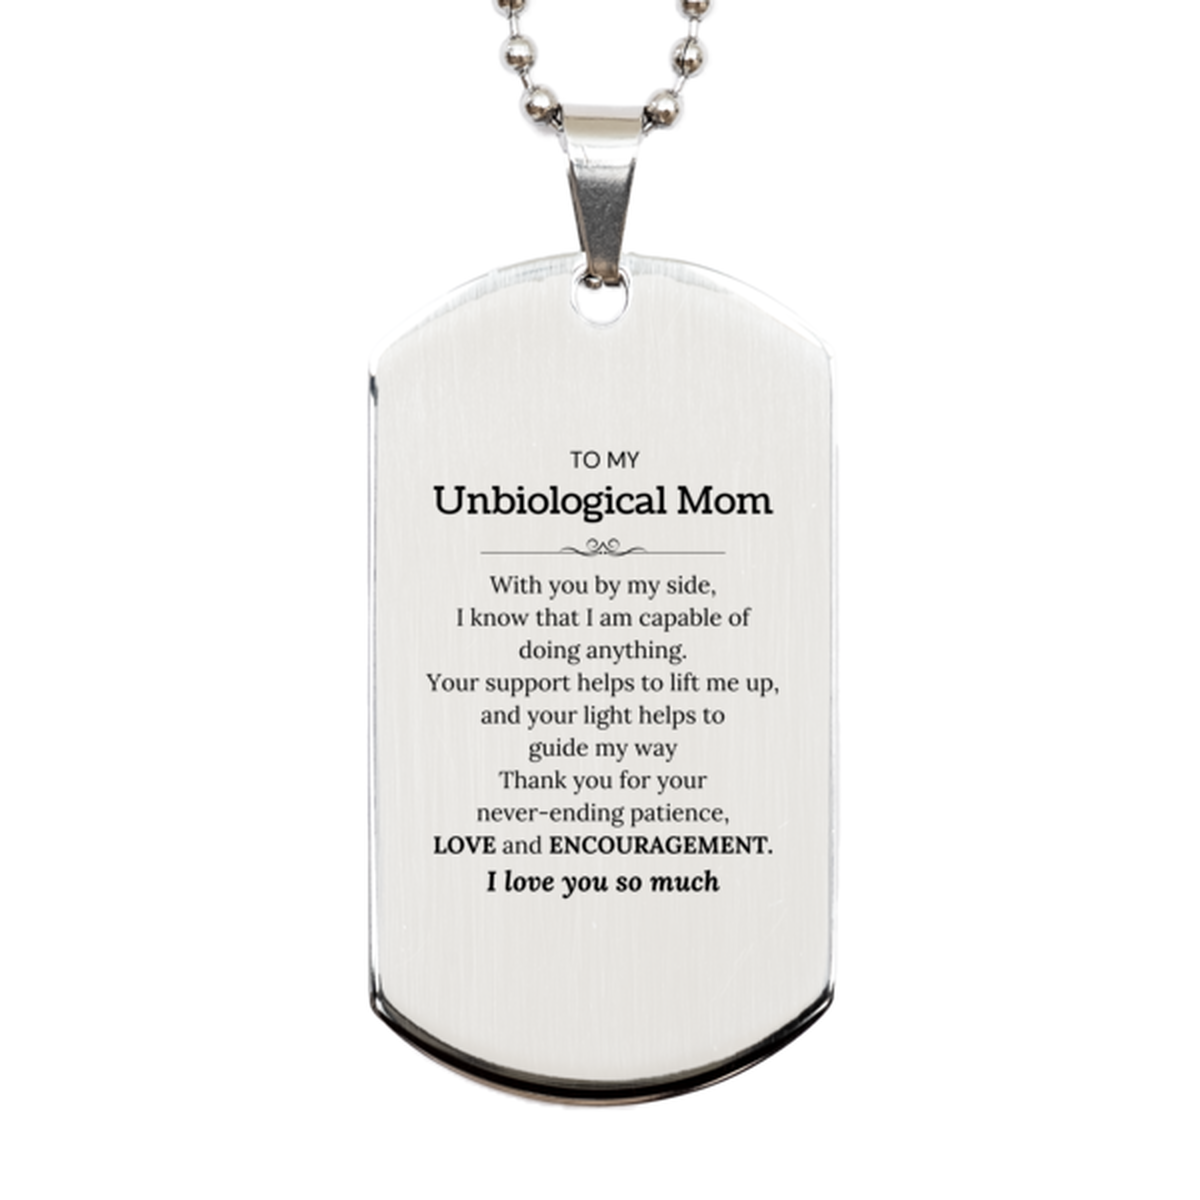 Appreciation Unbiological Mom Silver Dog Tag Gifts, To My Unbiological Mom Birthday Christmas Wedding Keepsake Gifts for Unbiological Mom With you by my side, I know that I am capable of doing anything. I love you so much